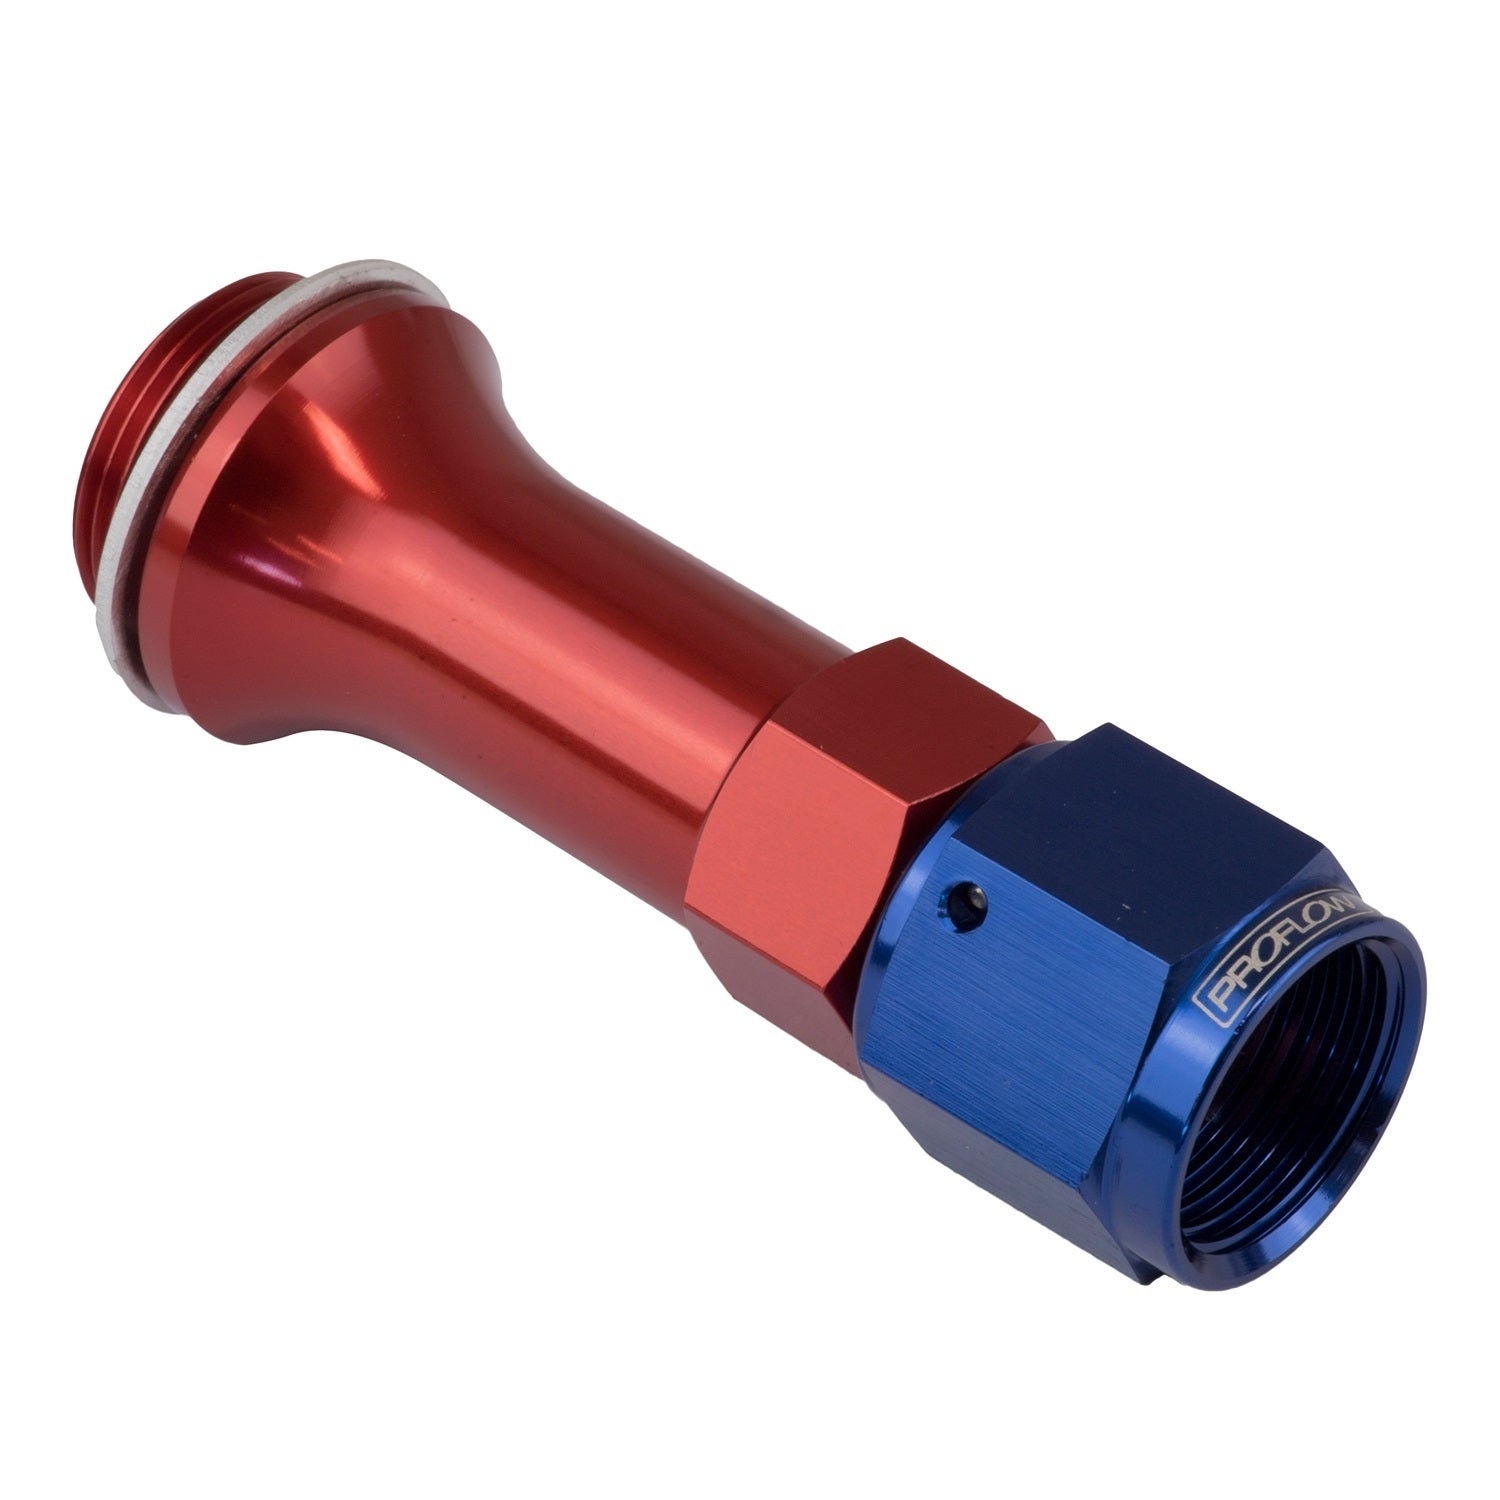 Proflow Carburettor Inlet Hose End Female -06AN To 9/16 x 24 For Demon Red/Blue 